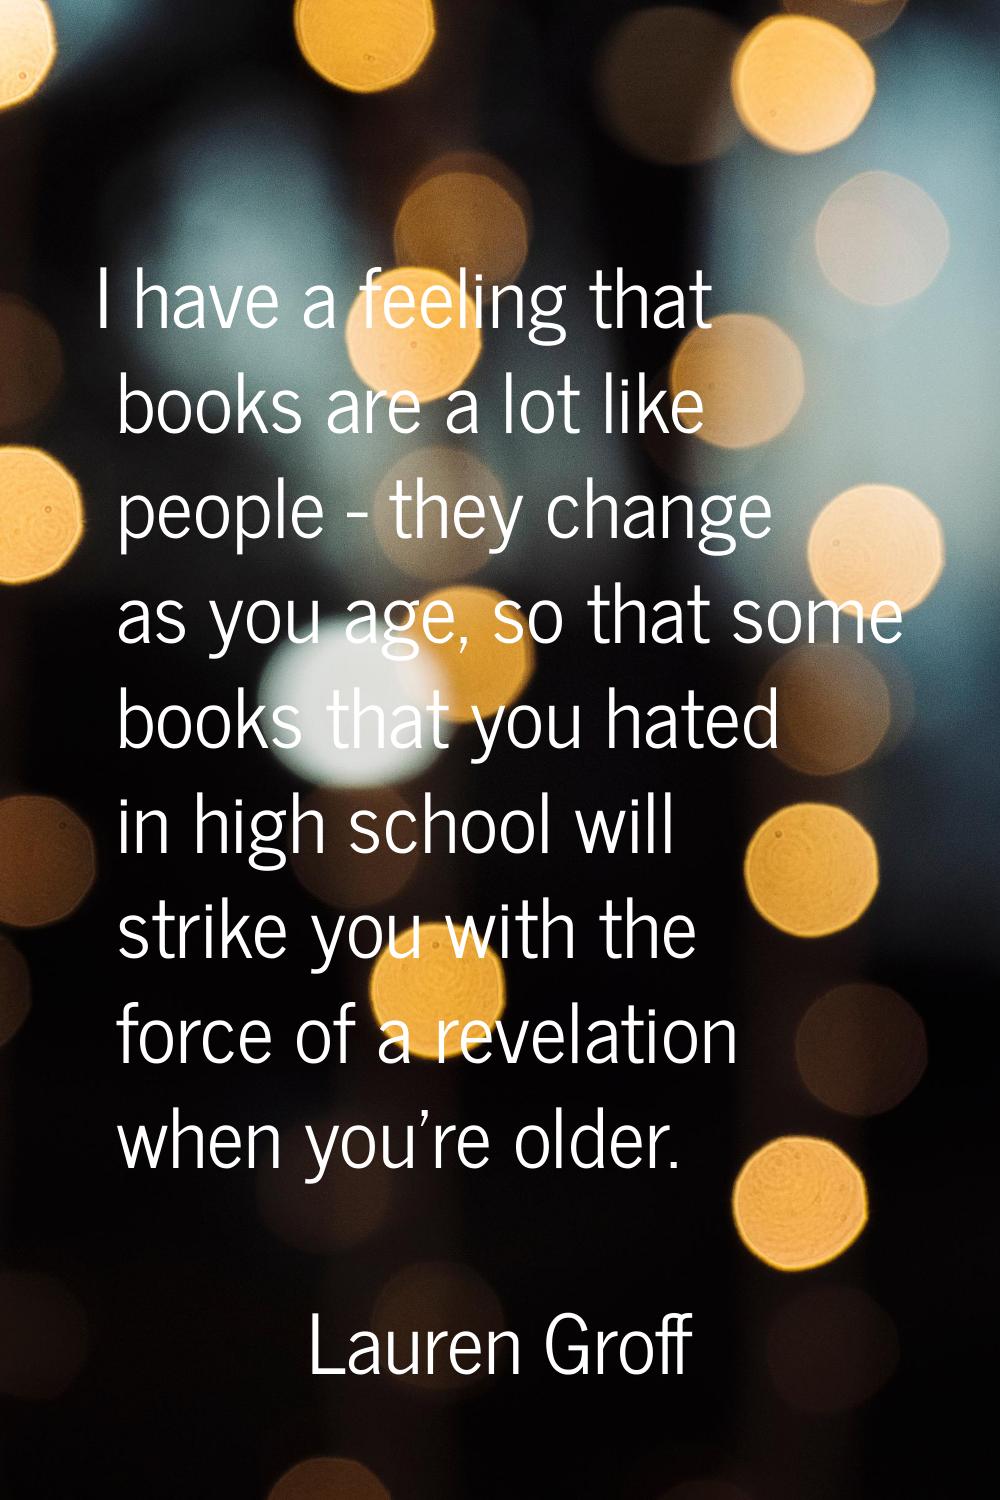 I have a feeling that books are a lot like people - they change as you age, so that some books that